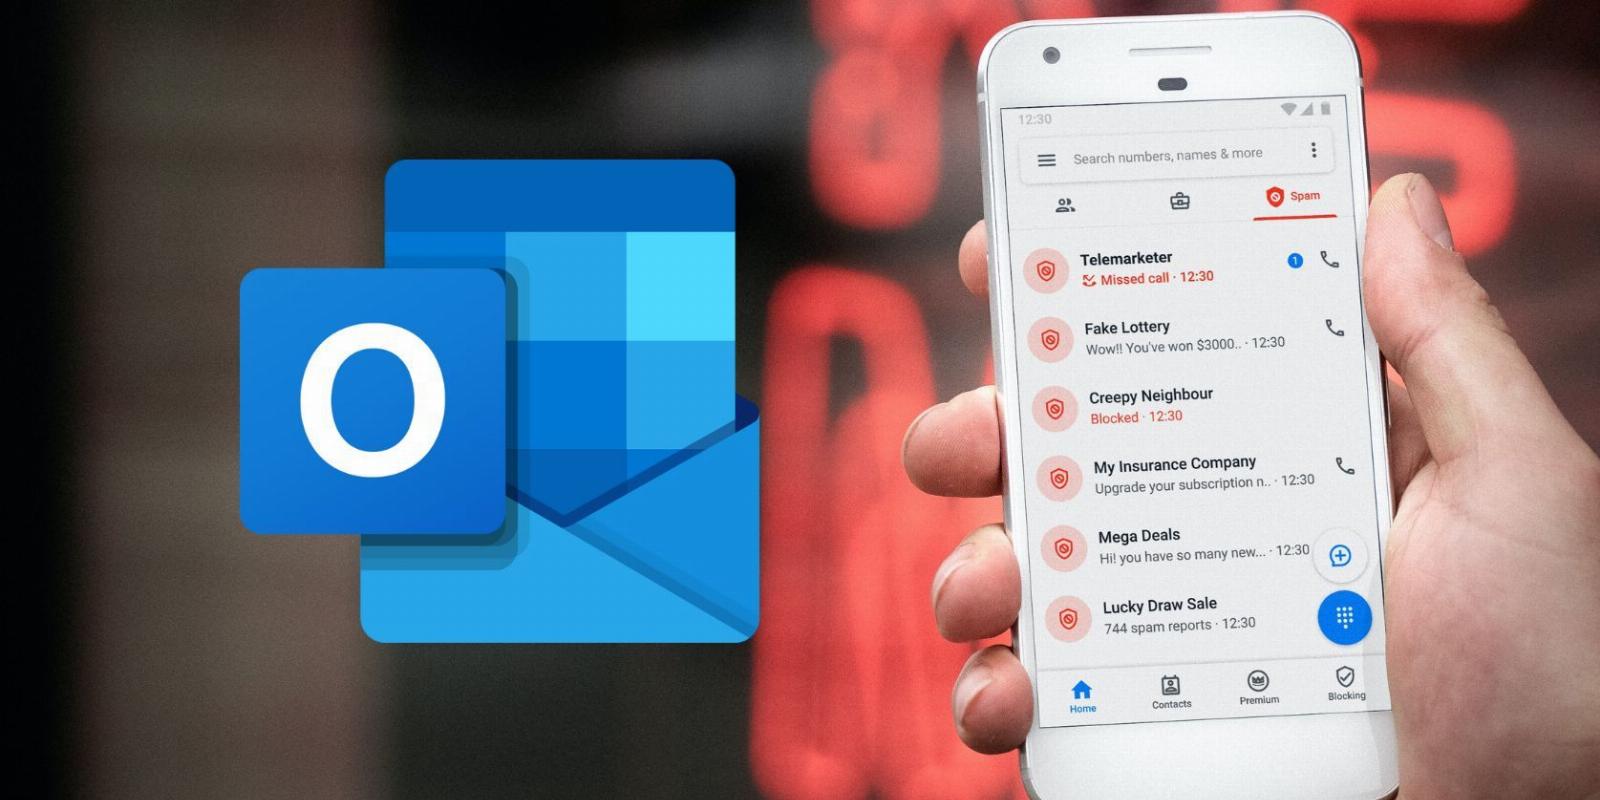 Microsoft Outlook Users Flooded With Spam After Filters Break